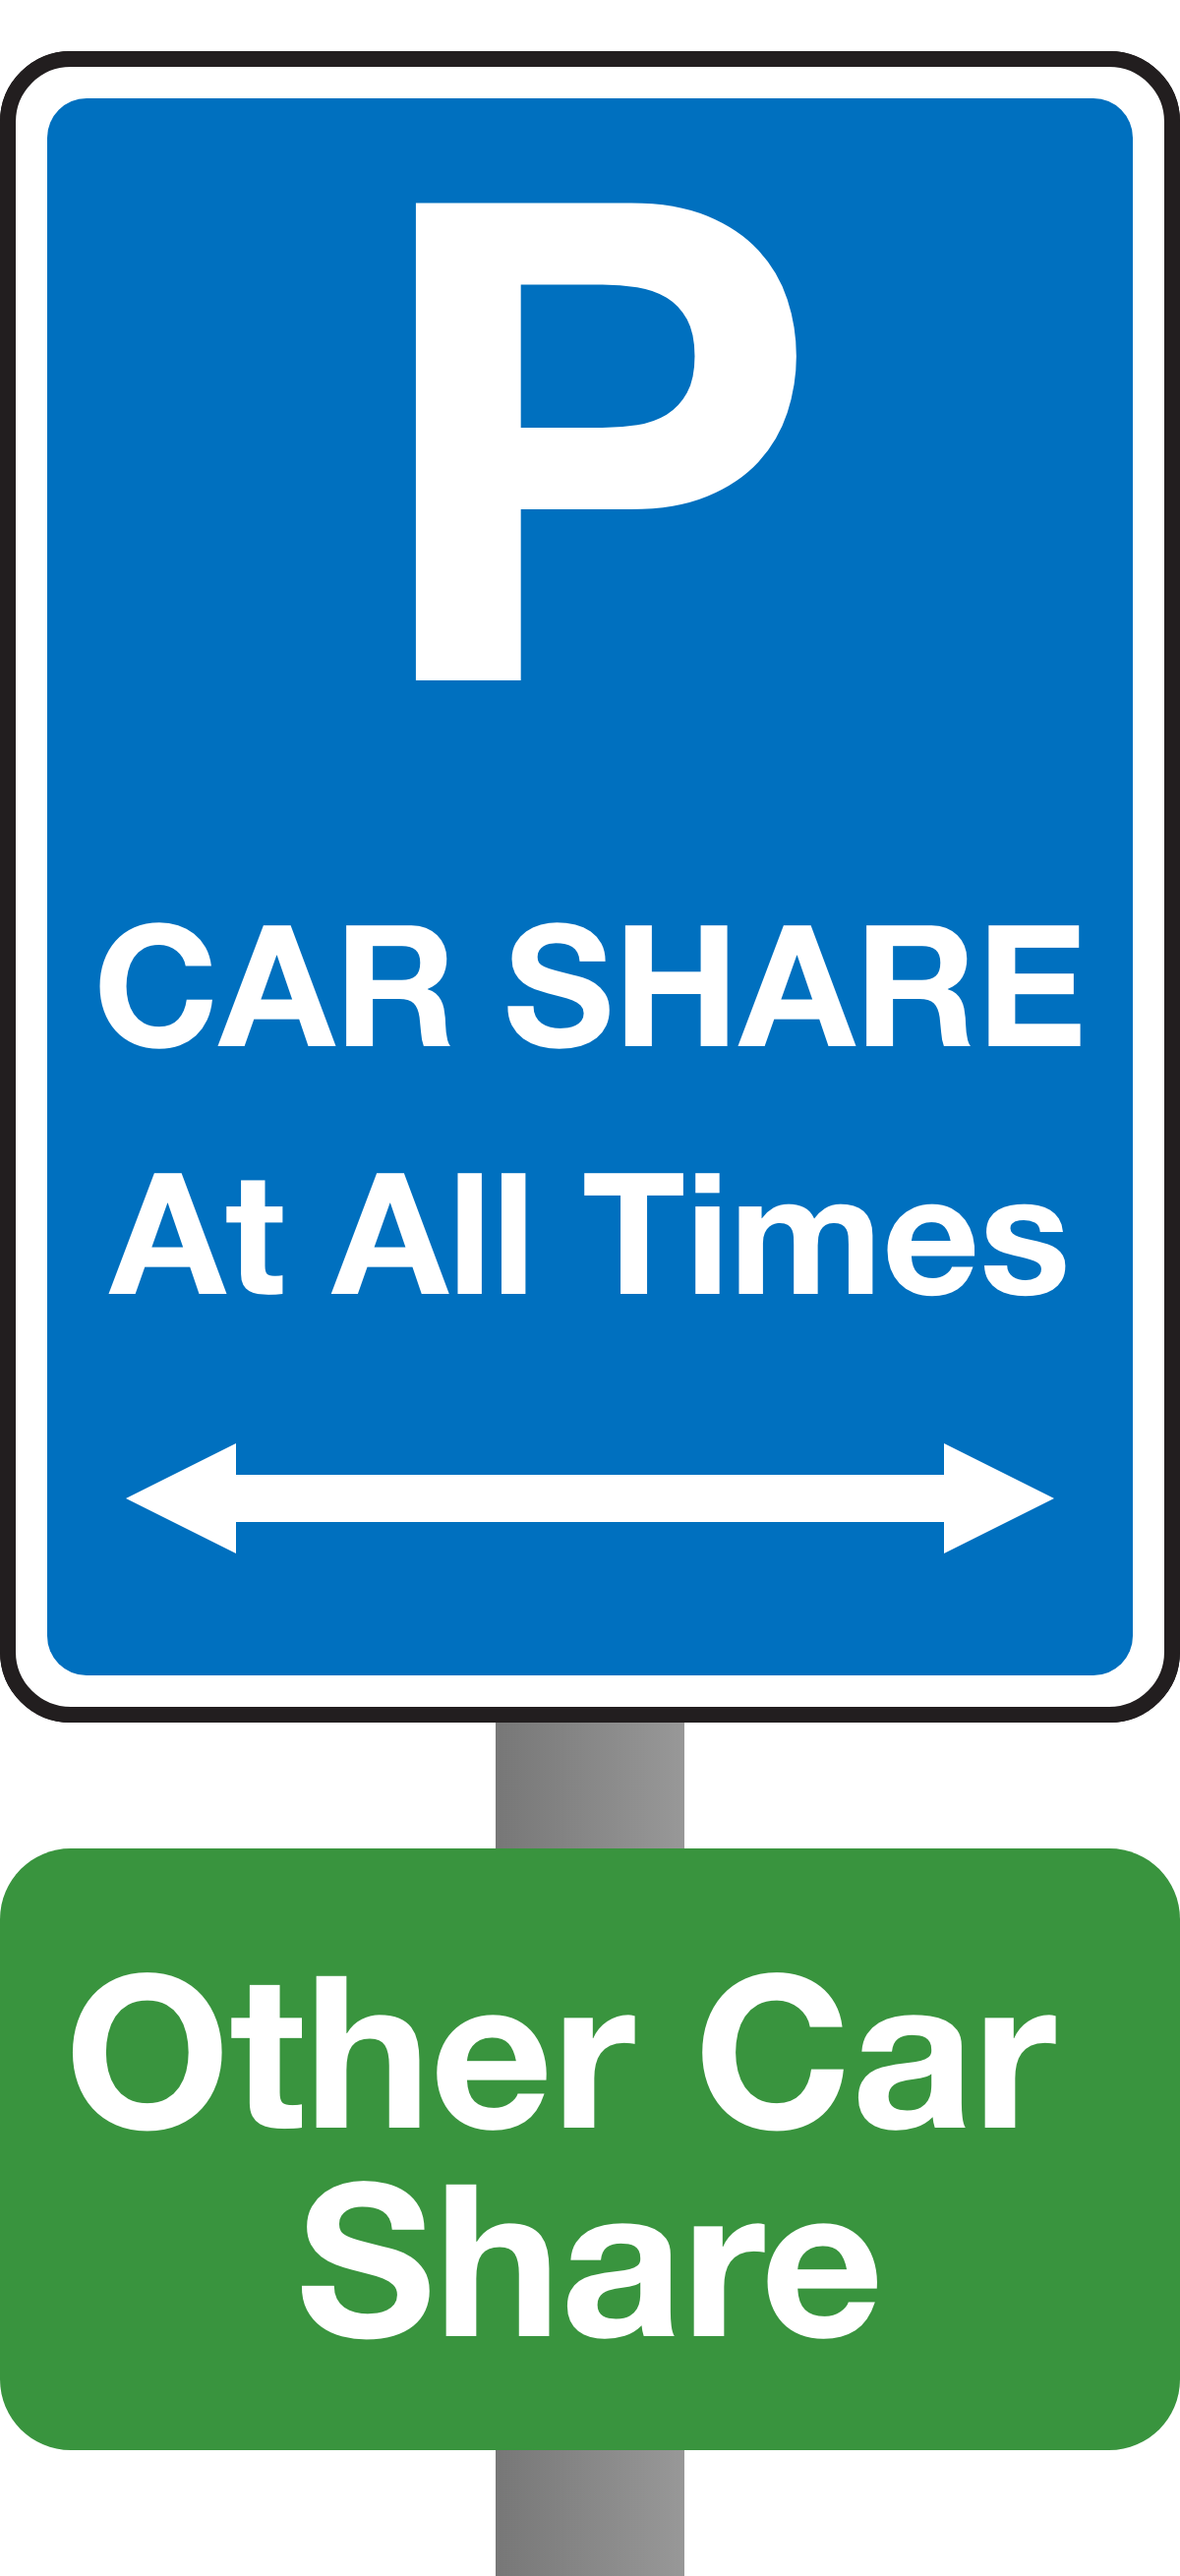 Other car share Parking Sign